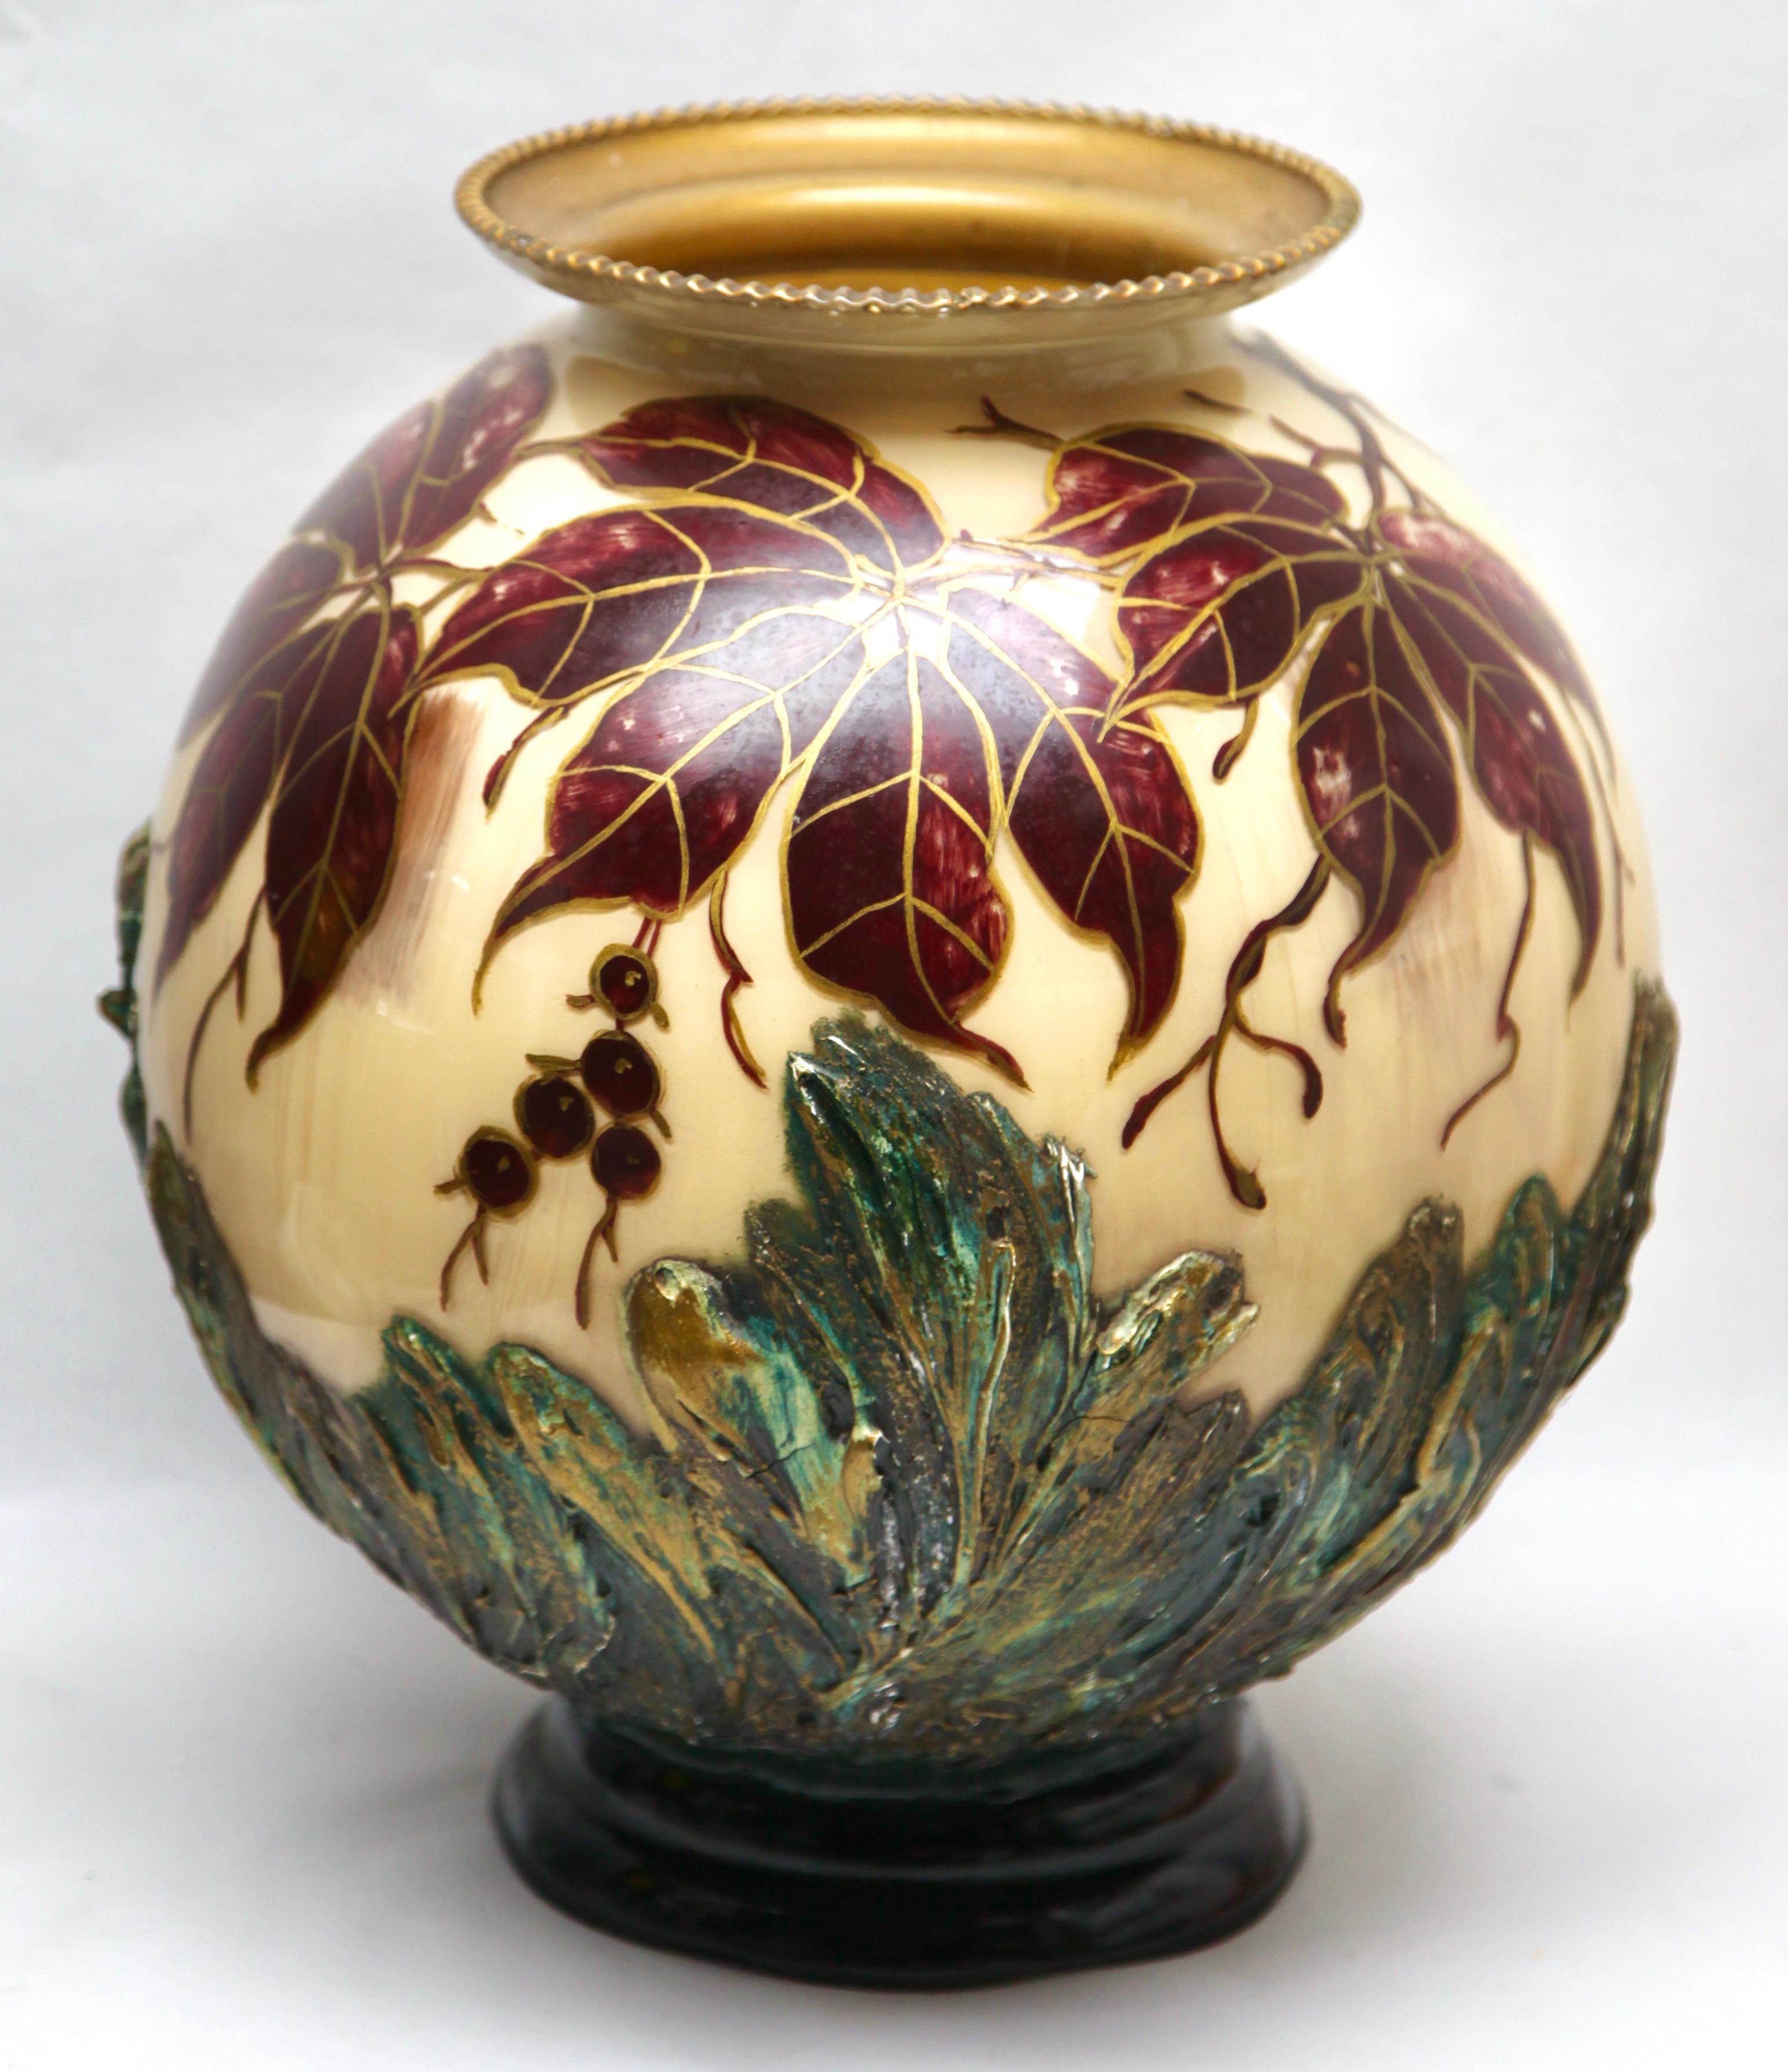 Art nouveau large handmade and hand painted opaline vase, Belgium 1920s
Handmade and hand-glazed in brilliant coloured with a spray of chrysanthemum blooms
Made in Belgium
Art Nouveau period 1920 fine quality.

The pieces are in Good condition